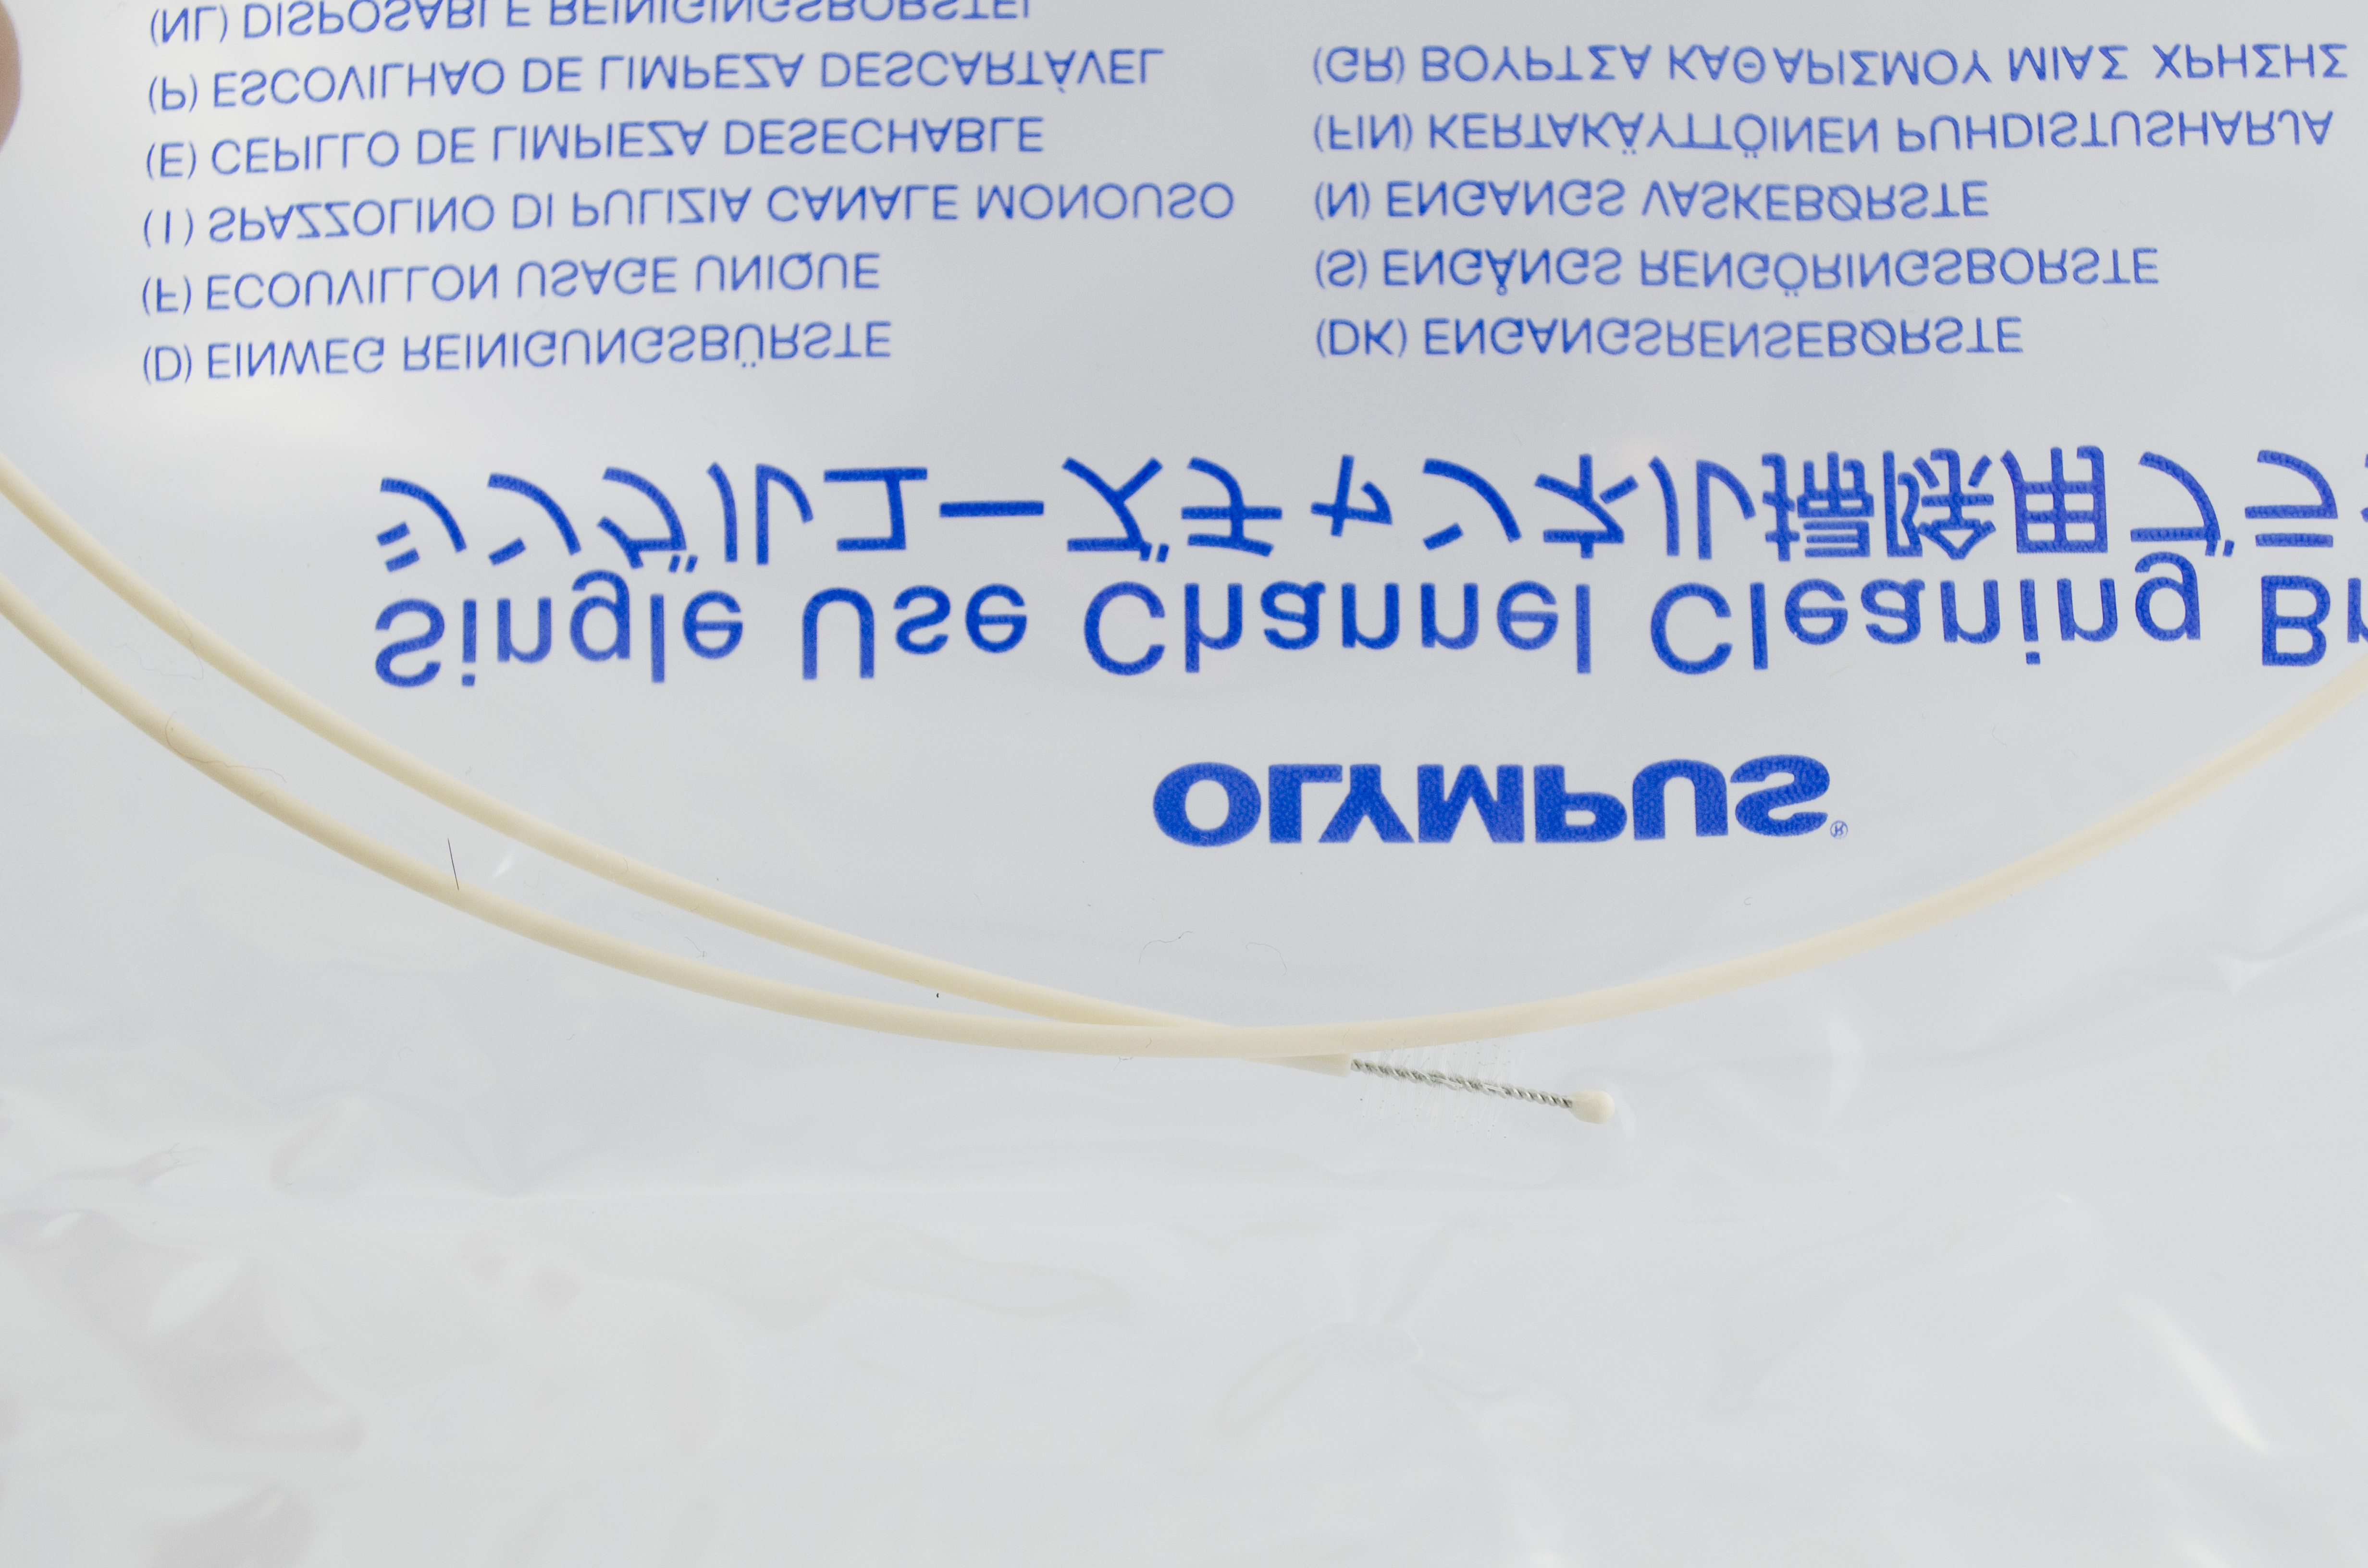 [In-Date] Olympus Disposable Cleaning Brush - BW-201B (Original Packaging)